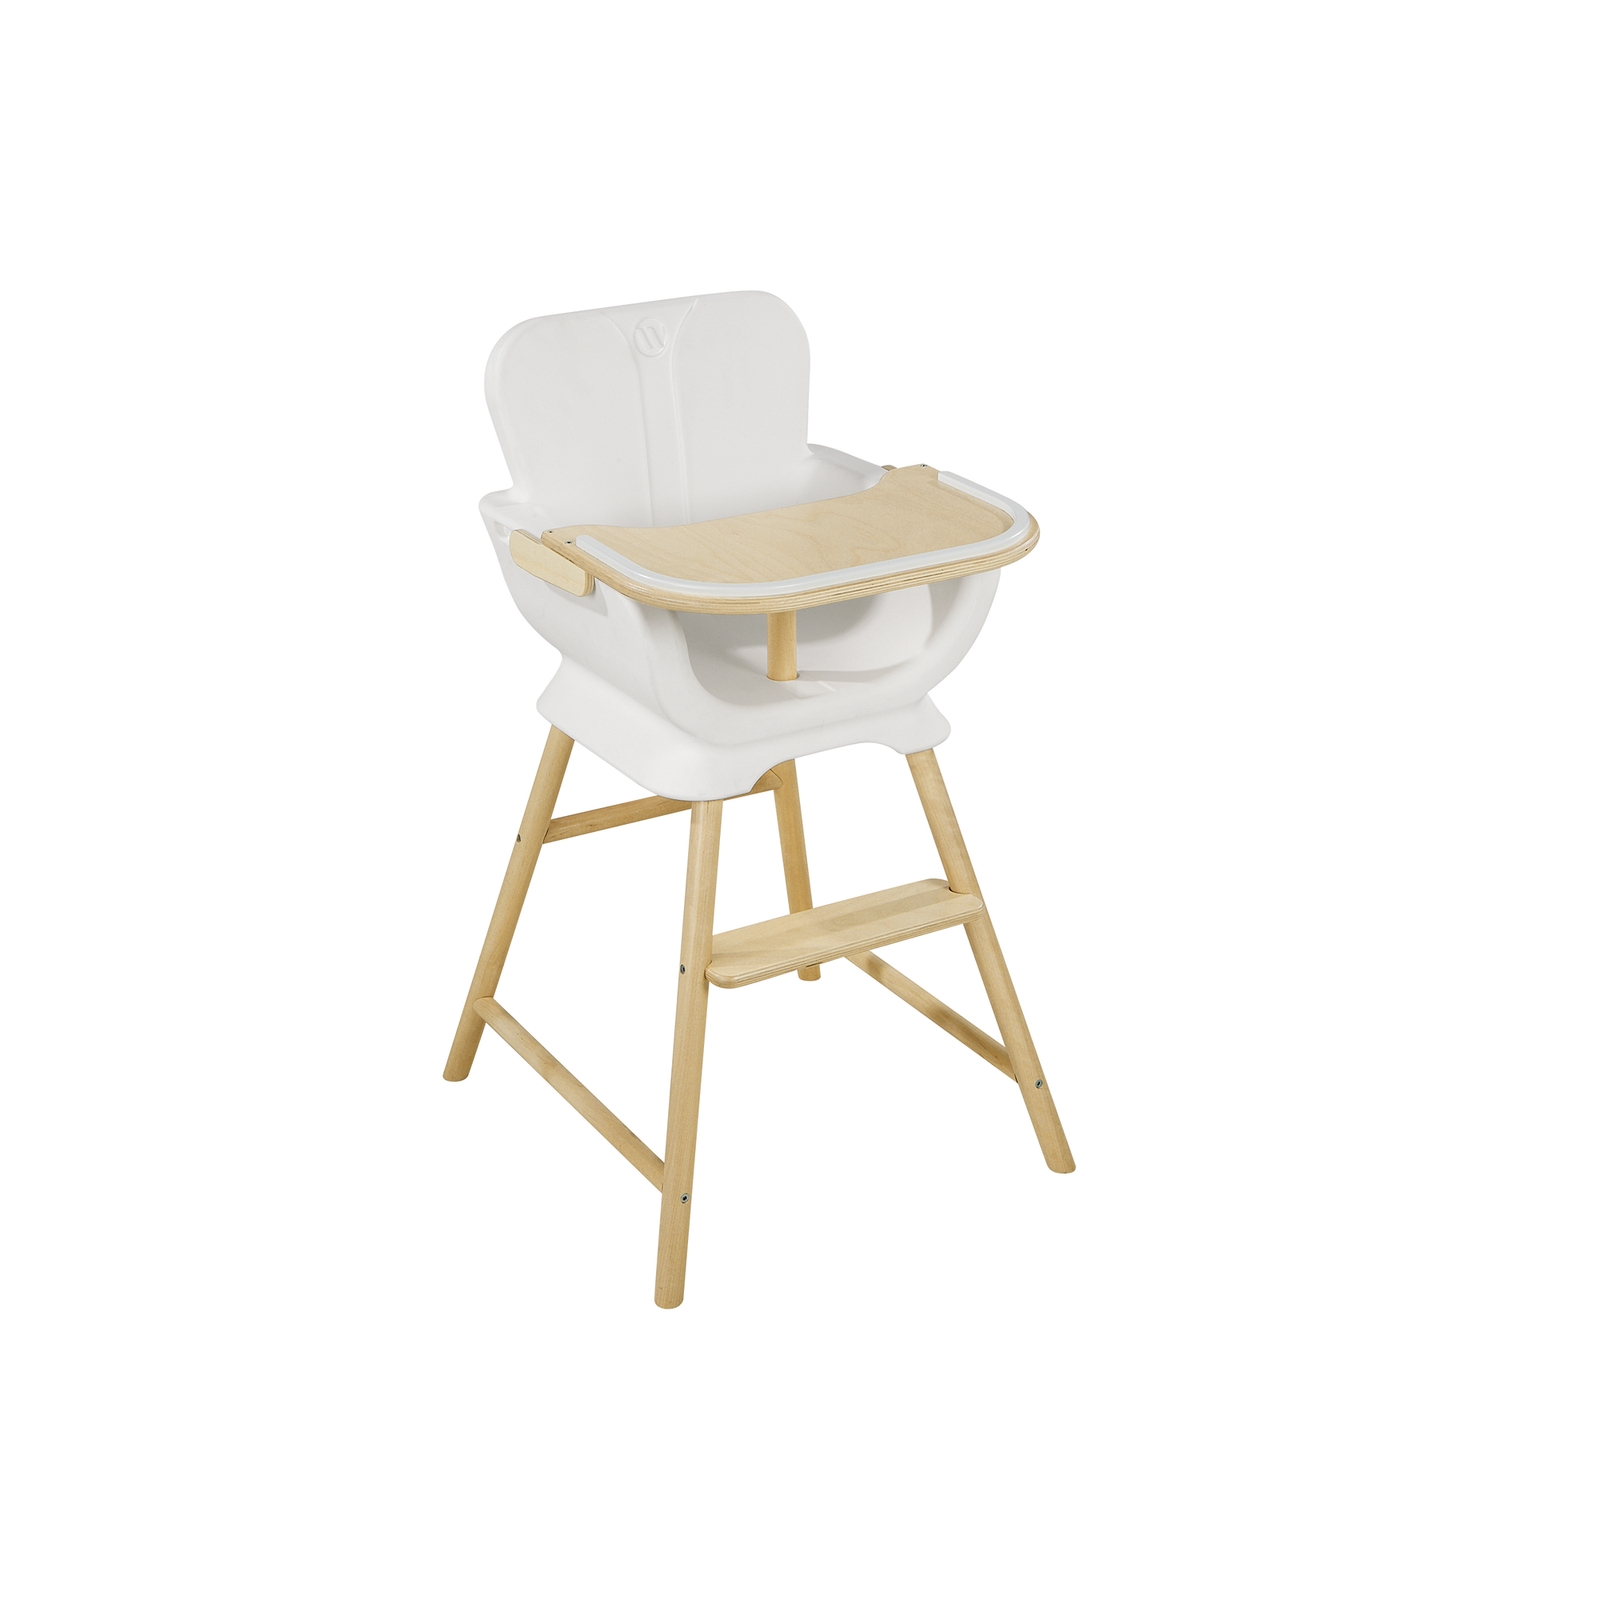 Igloo High Chair and Tray - White